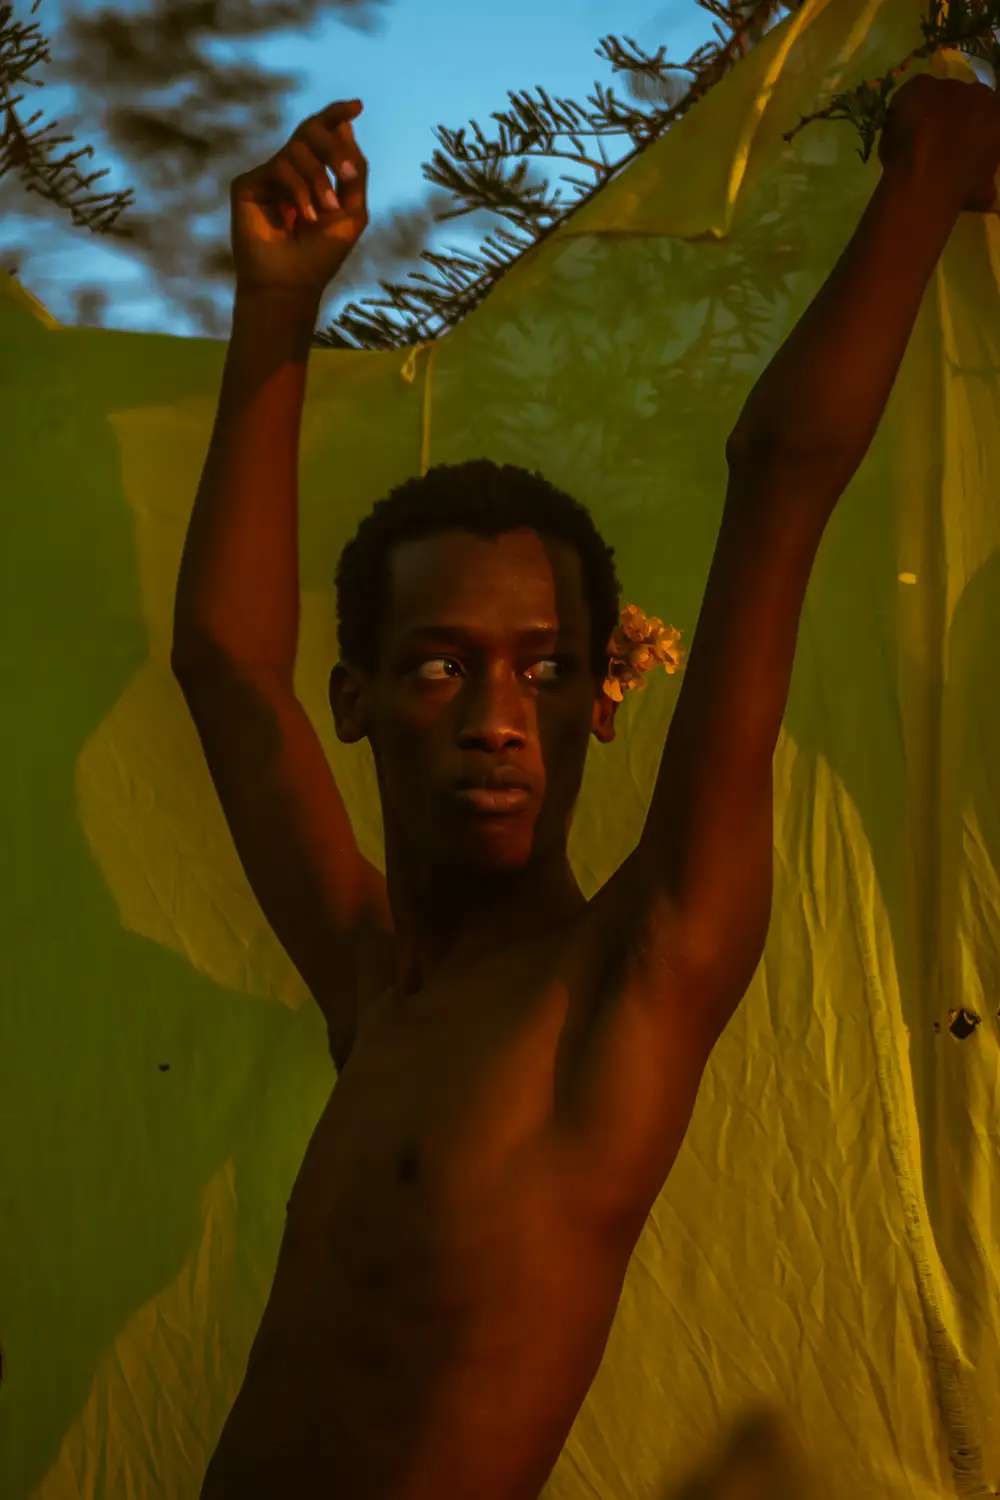 Shirtless man in front of a yellow backdrop with his hands up